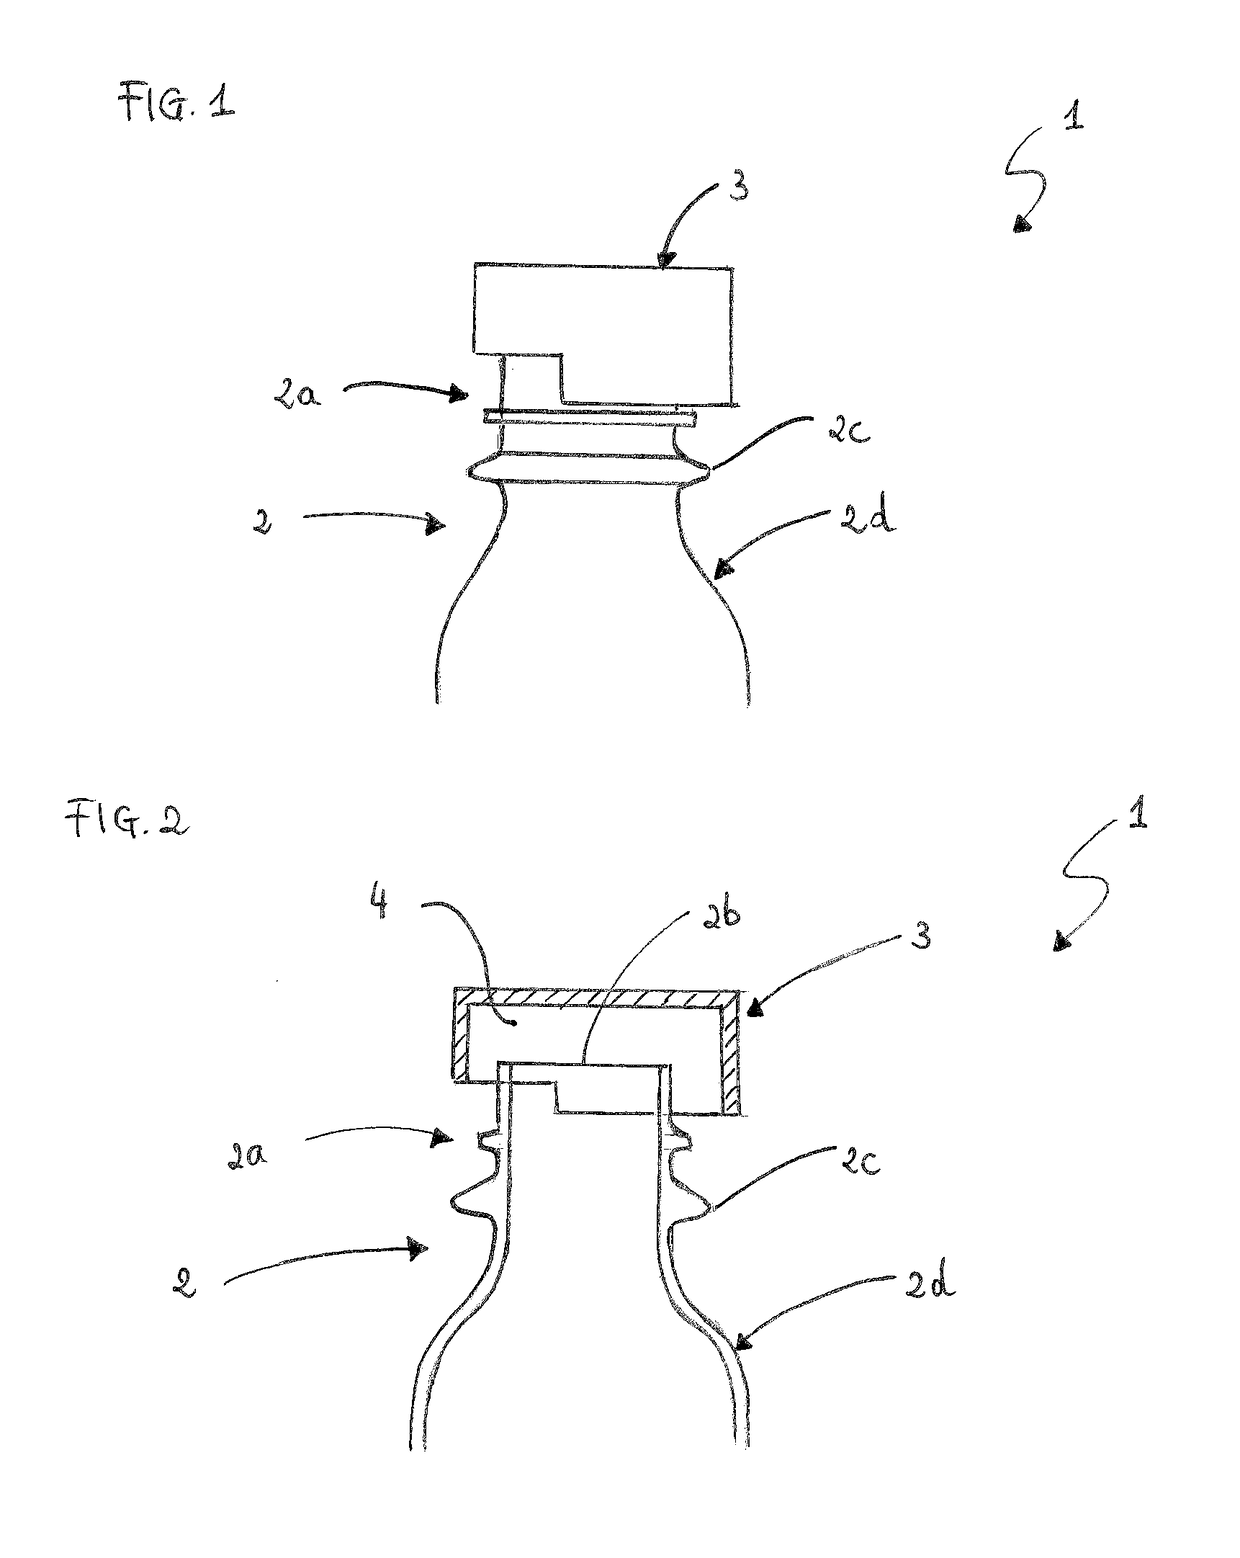 Process station for a parison or a container made of thermoplastic material, apparatus for processing parisons or containers, production and packaging line for producing and packaging the containers and method for producing and packaging containers